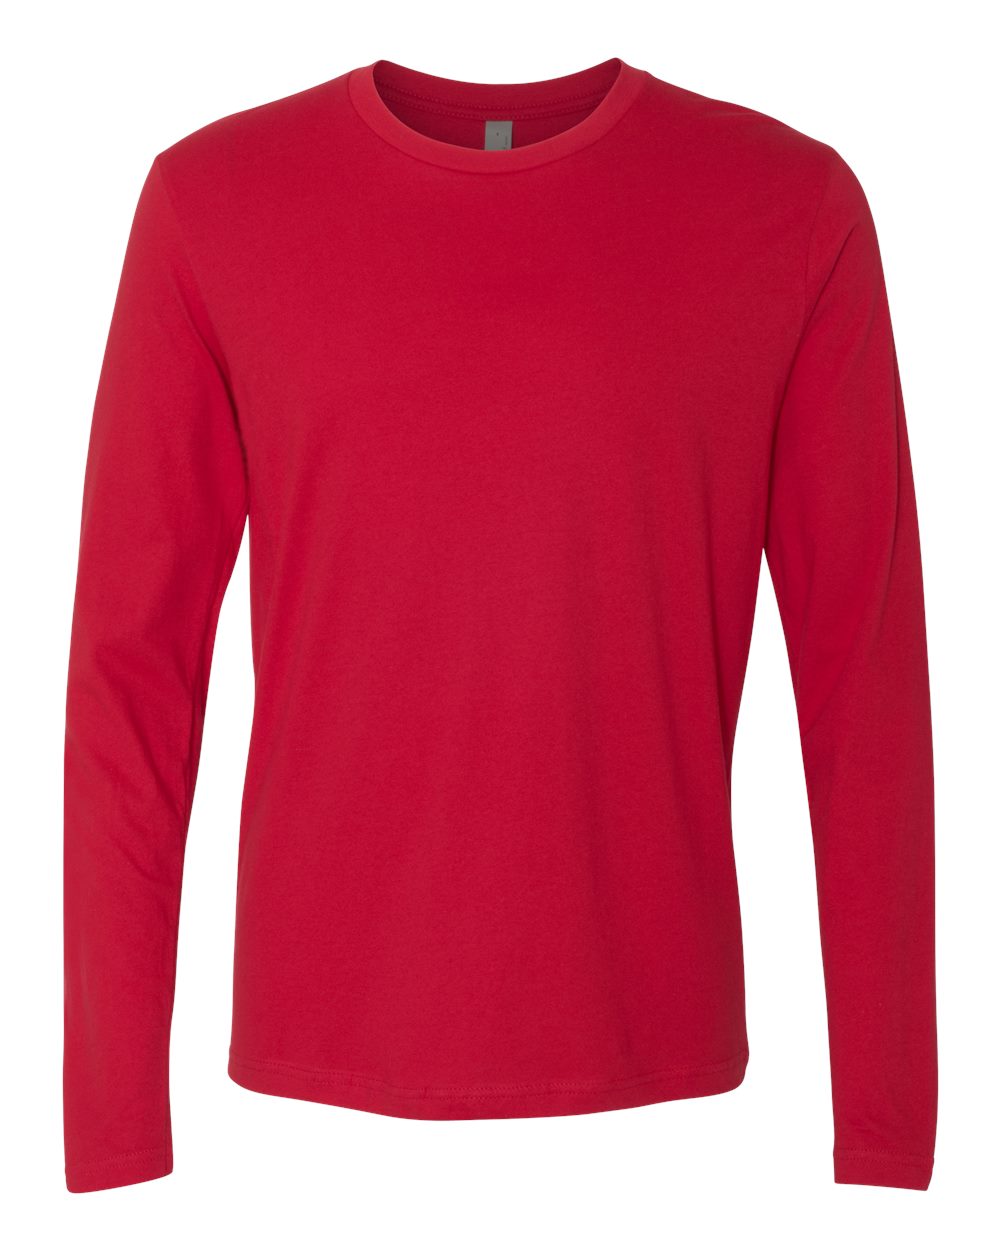 Next Level Long Sleeve (3601) in Red